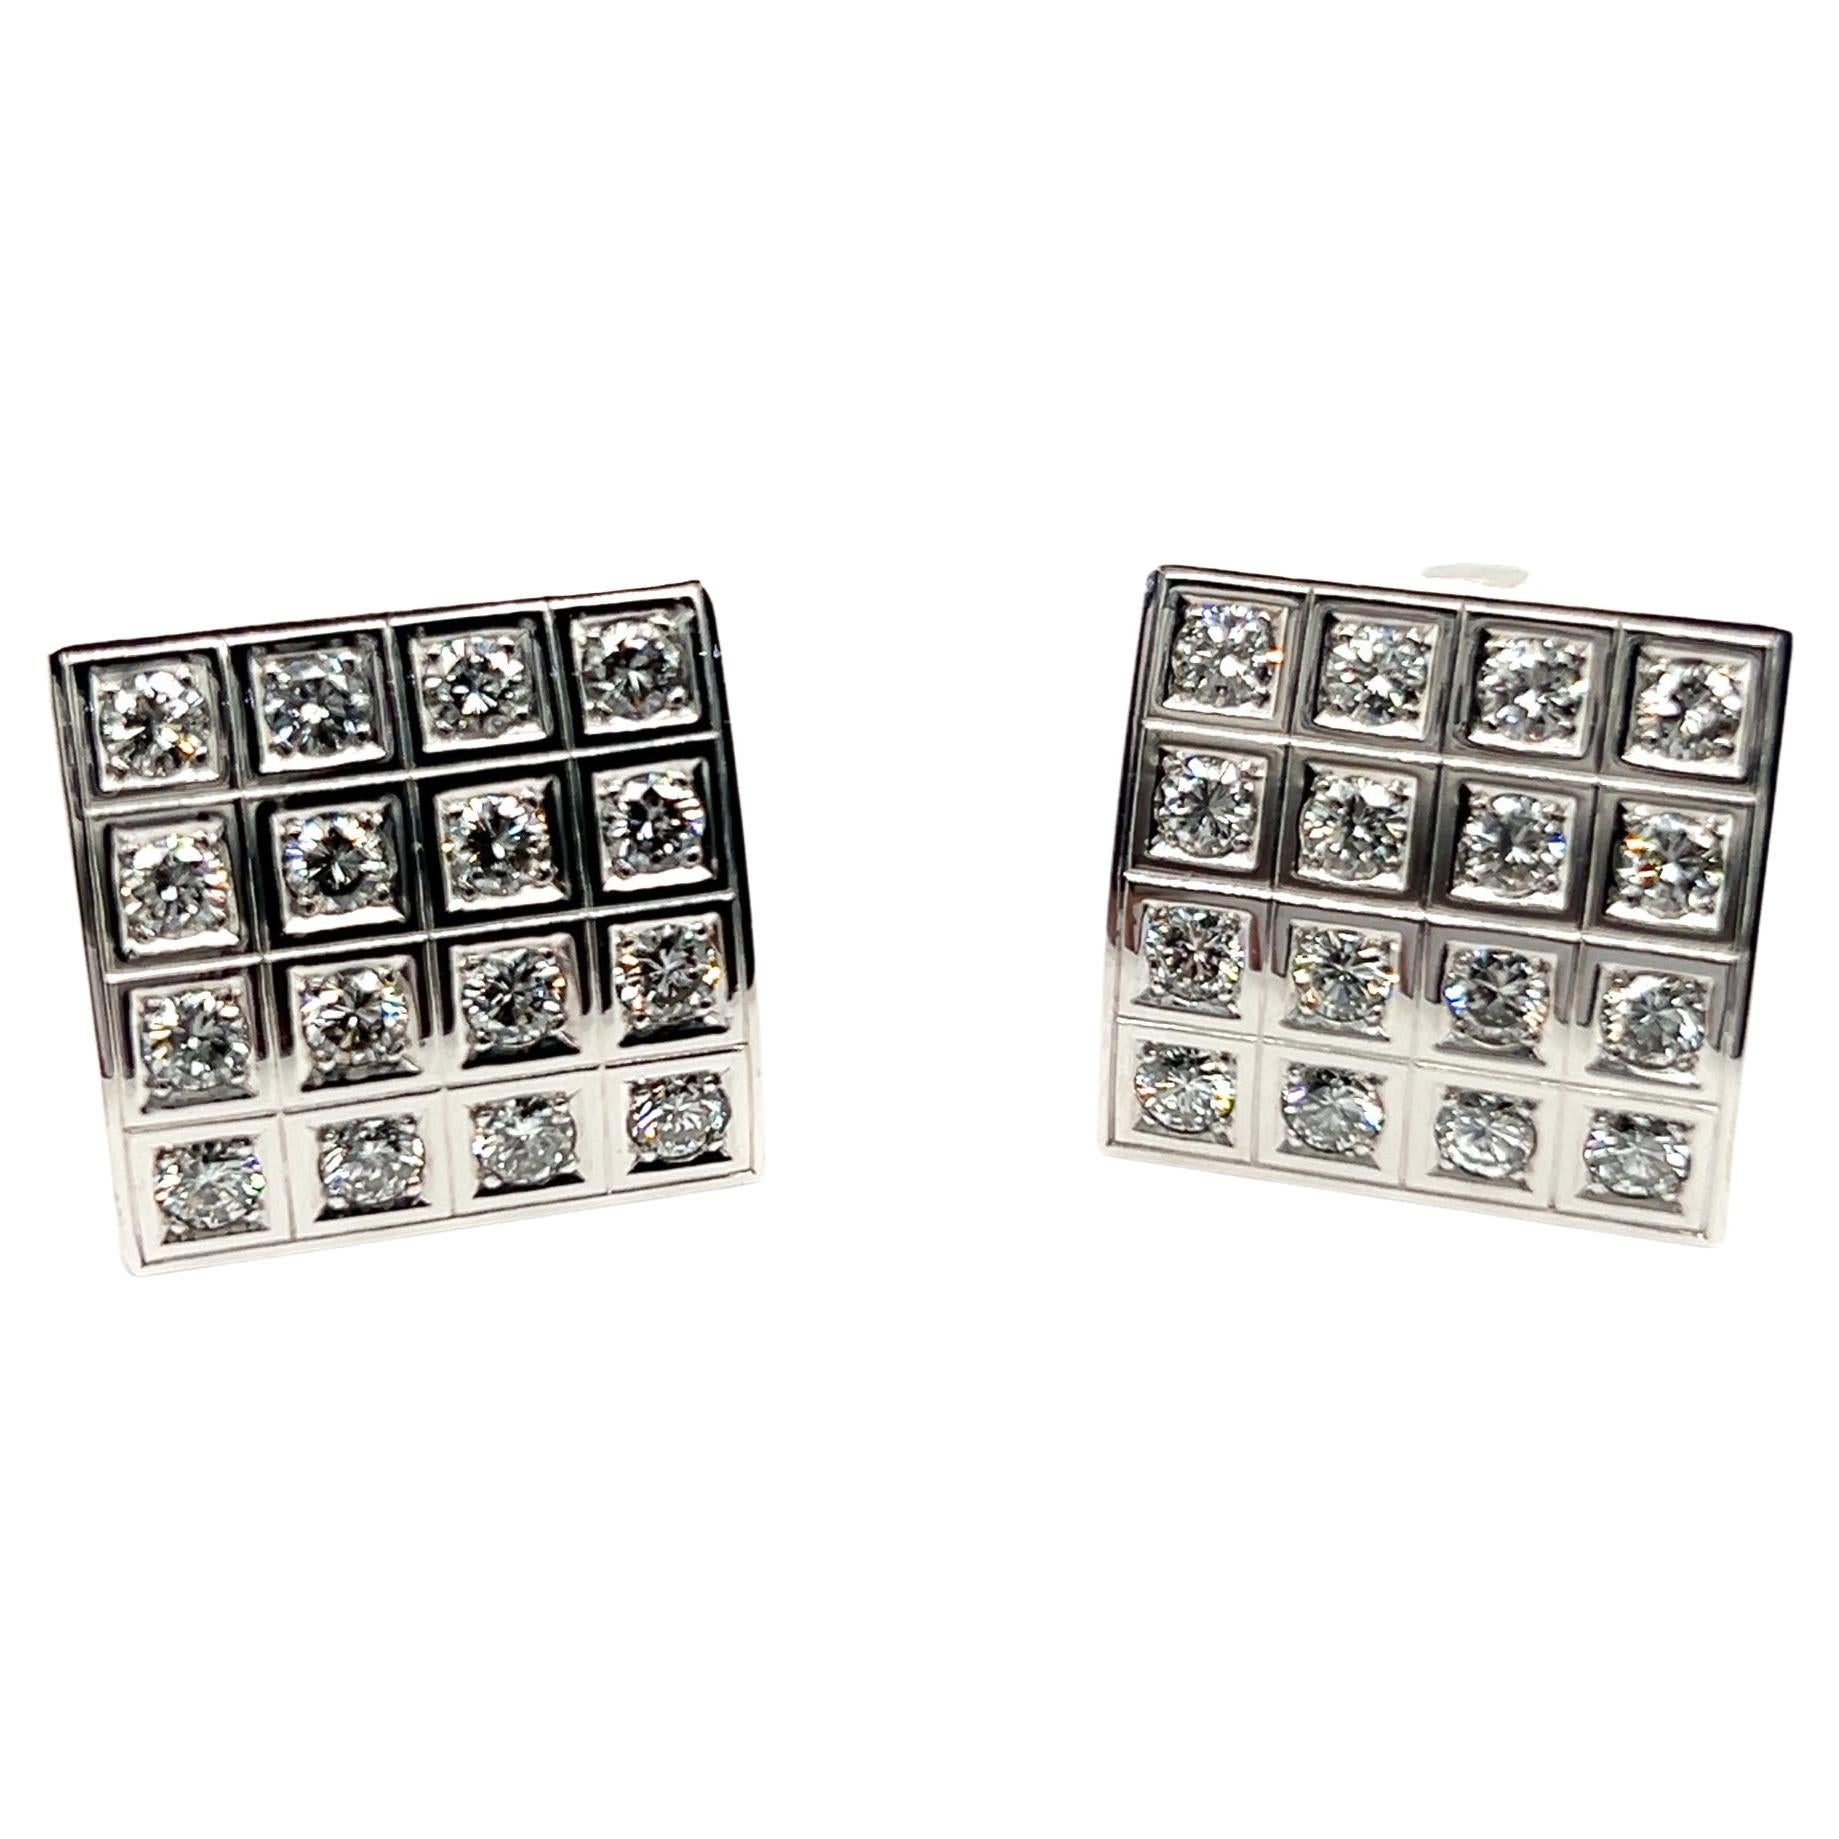  Bold Graphic Earrings with Diamonds in 18 Karat White Gold by Majo Fruithof